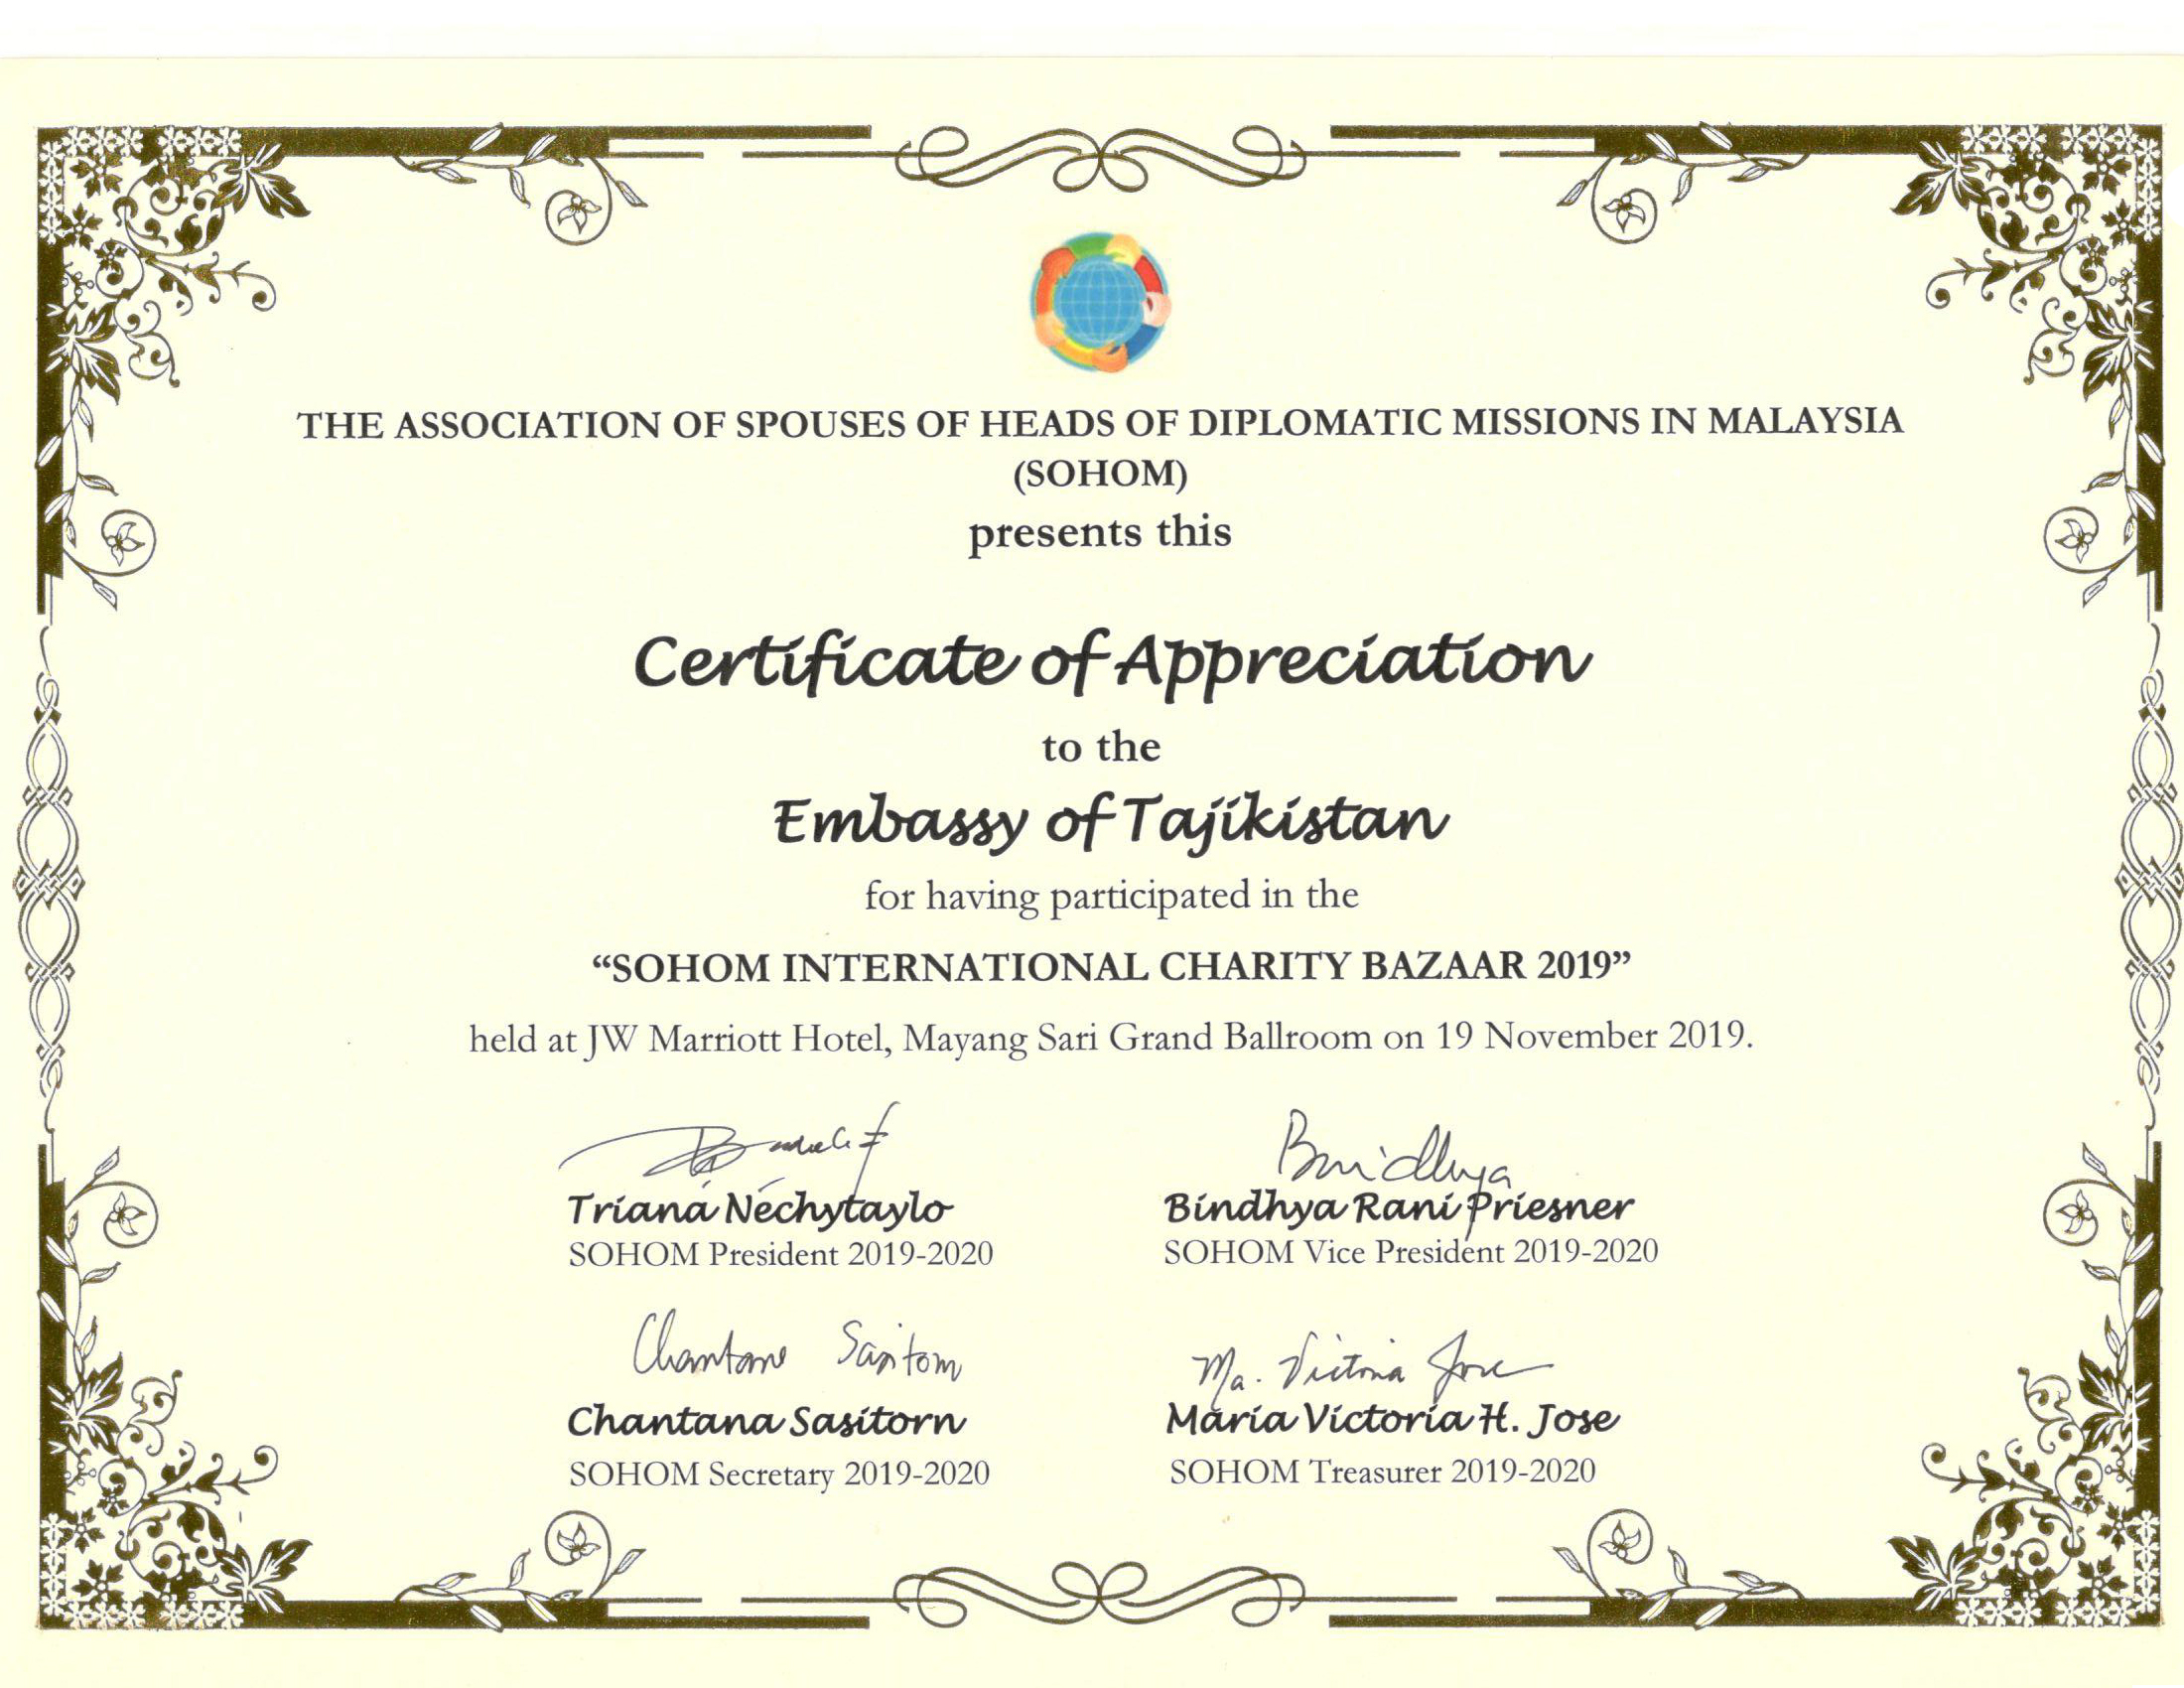 Participation of the Embassy of the Republic of Tajikistan in the SOHOM International charity bazaar 2019